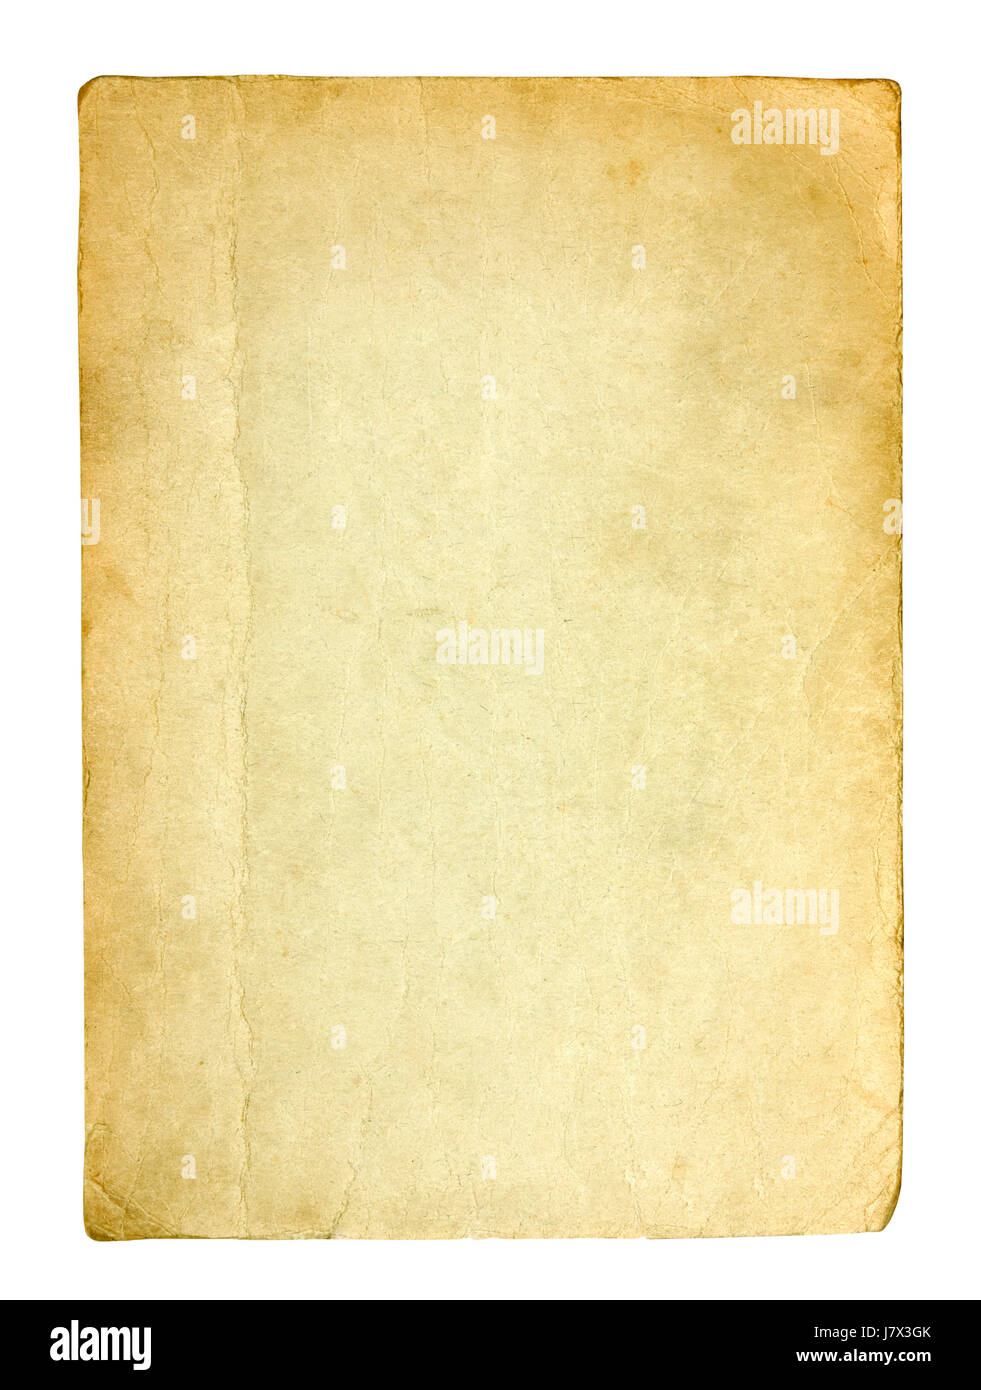 Piece of white blank paper stock photo. Image of sheet - 39464052